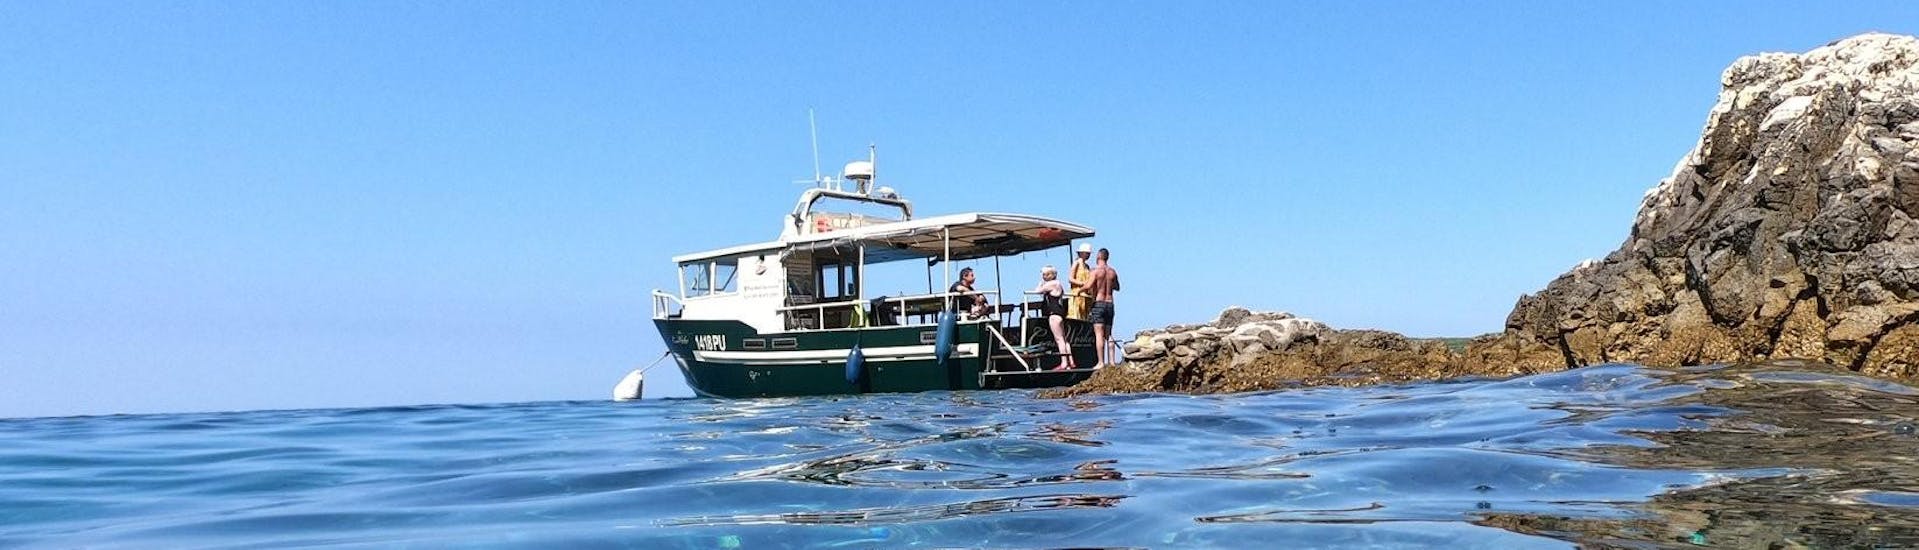 Private Boat Trip from Pula (up to 12 people) with Pula Boat Excursions - Hero image